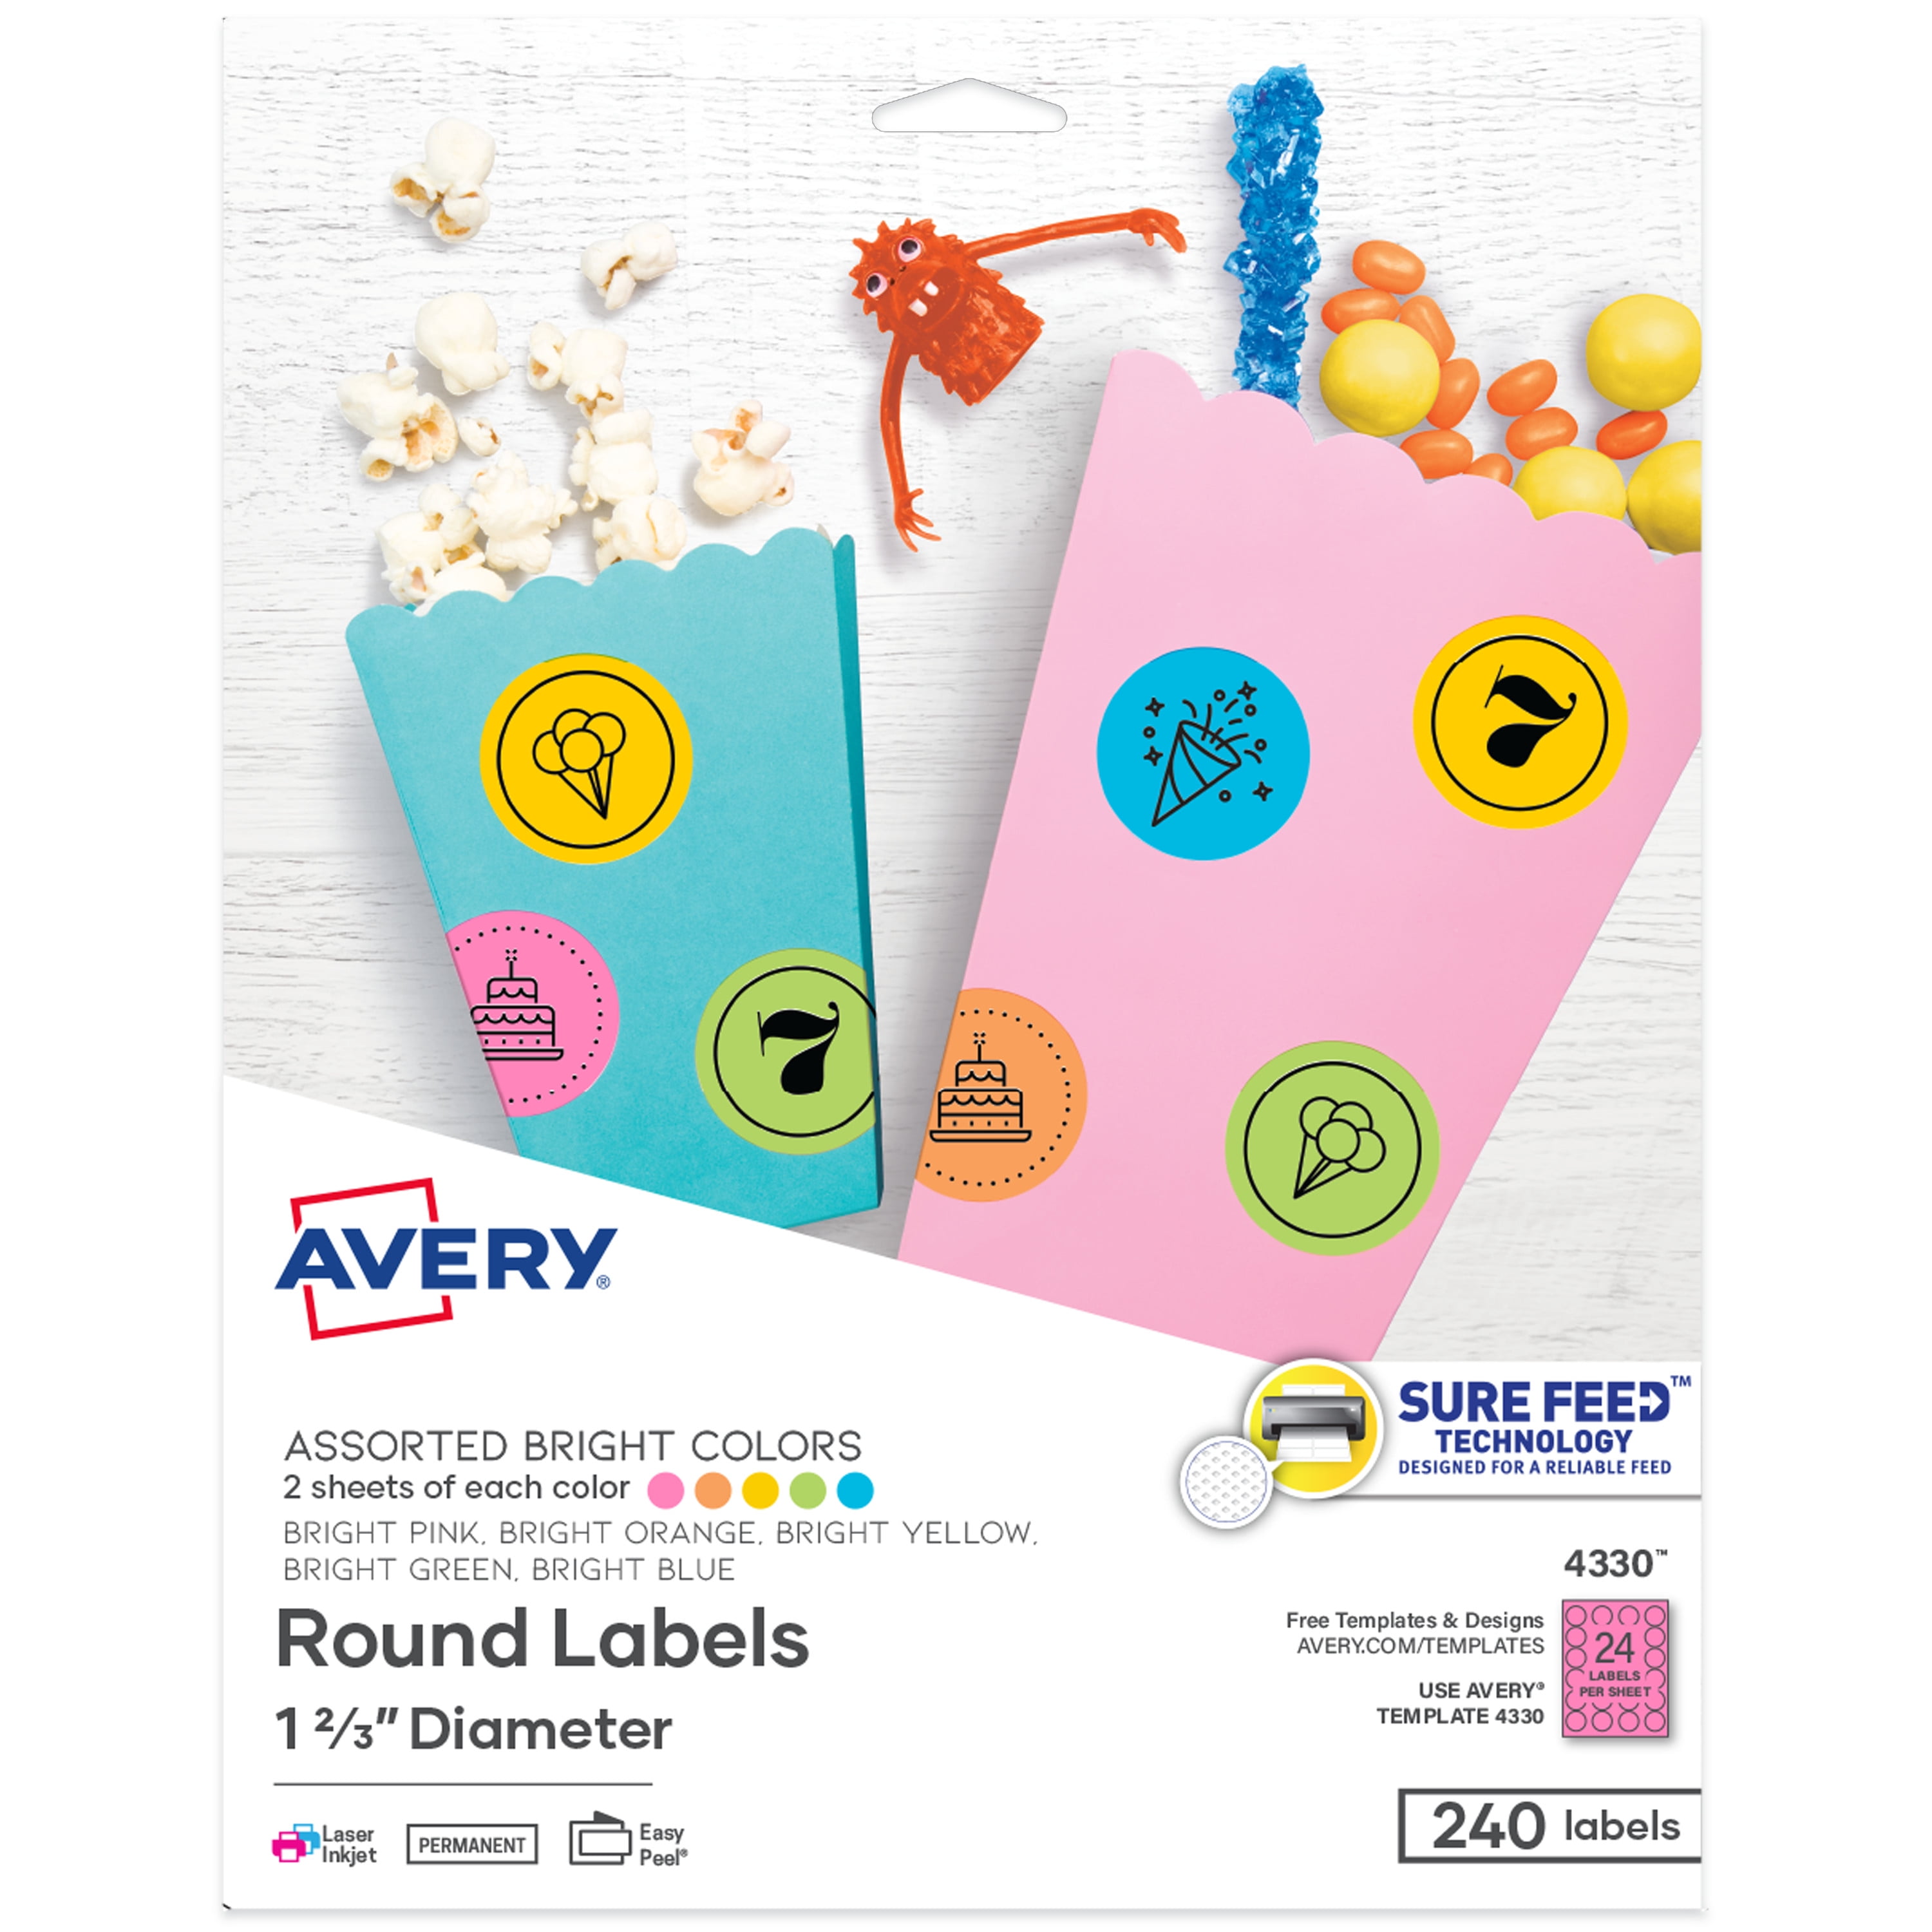 Avery Round Labels with Sure Feed, Assorted Bright Colors, 22323-223/23" Diameter,  Laser/Inkjet, 22340 Labels (423230) For 2 Inch Round Label Template